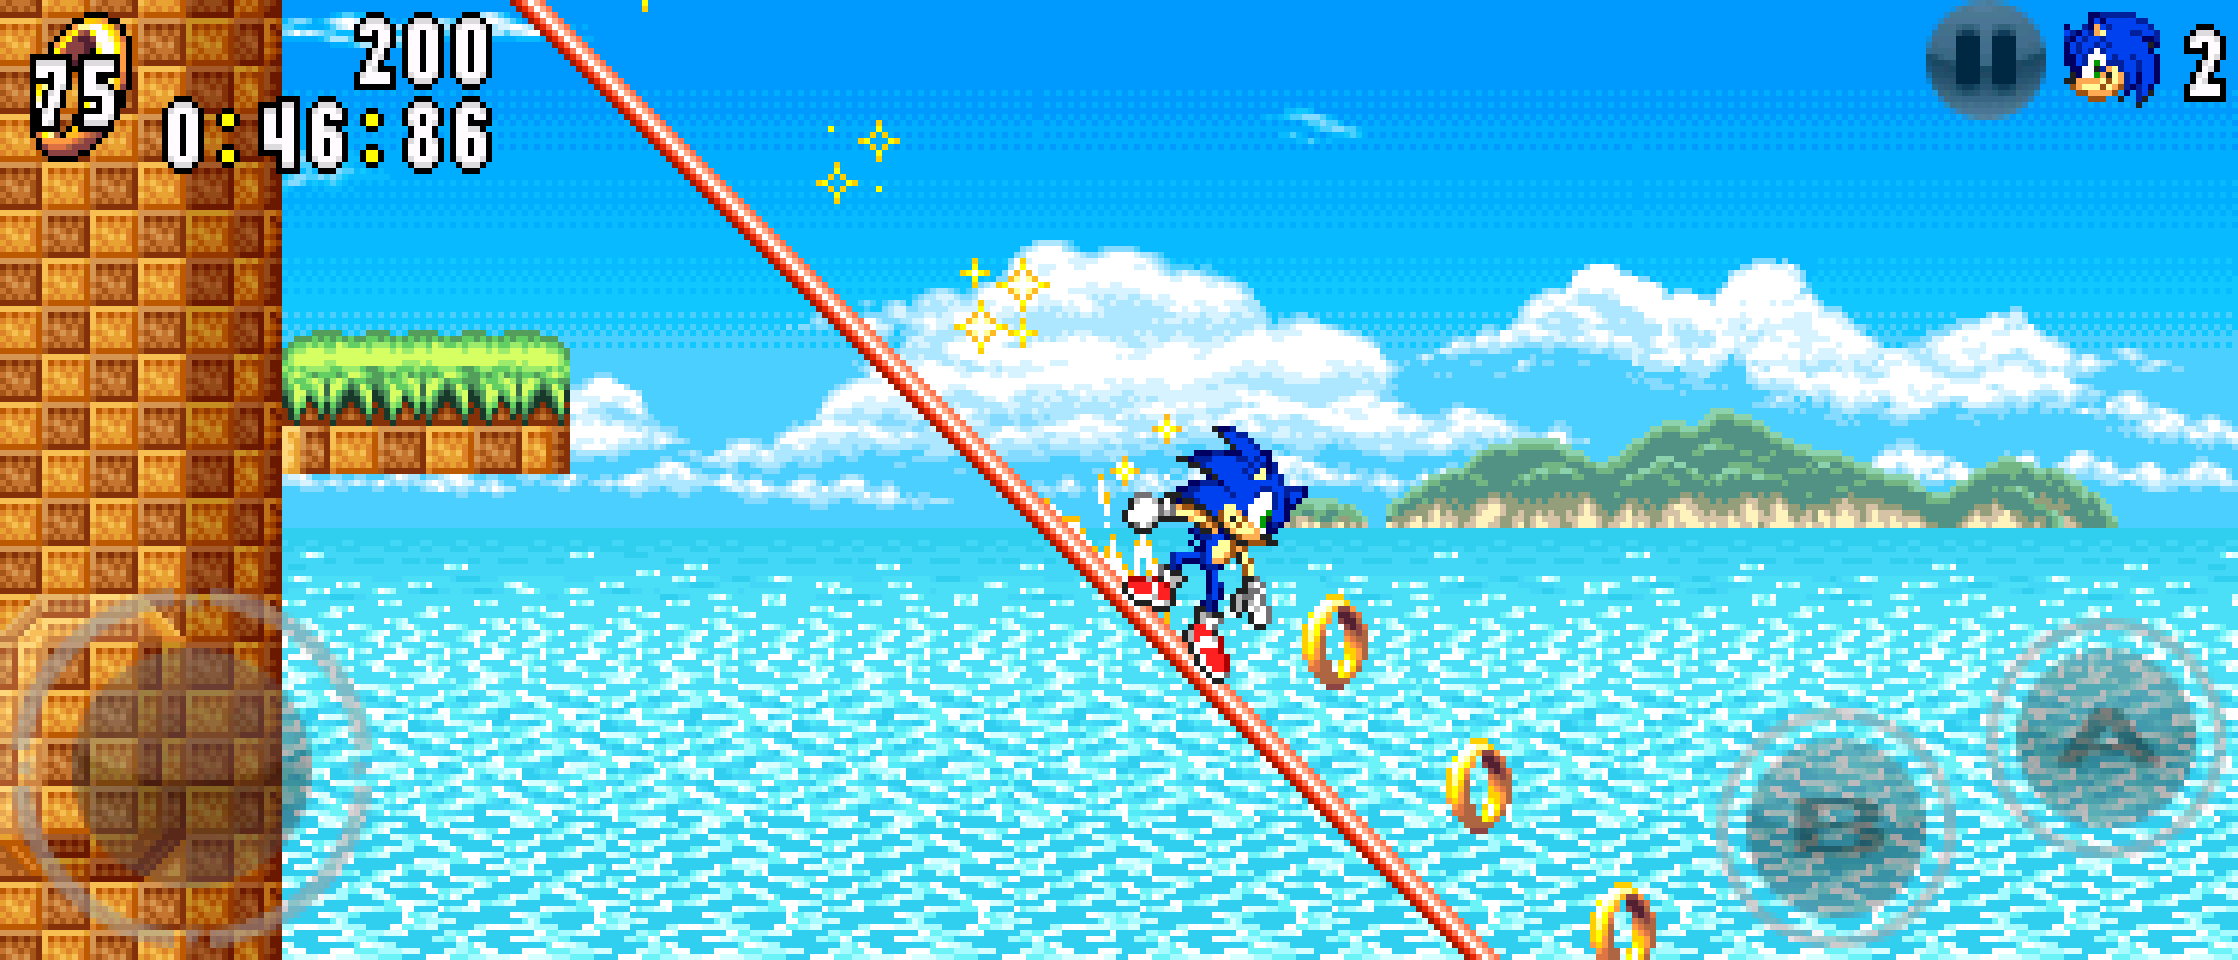 Sonic Advance ROM (Download for GBA)